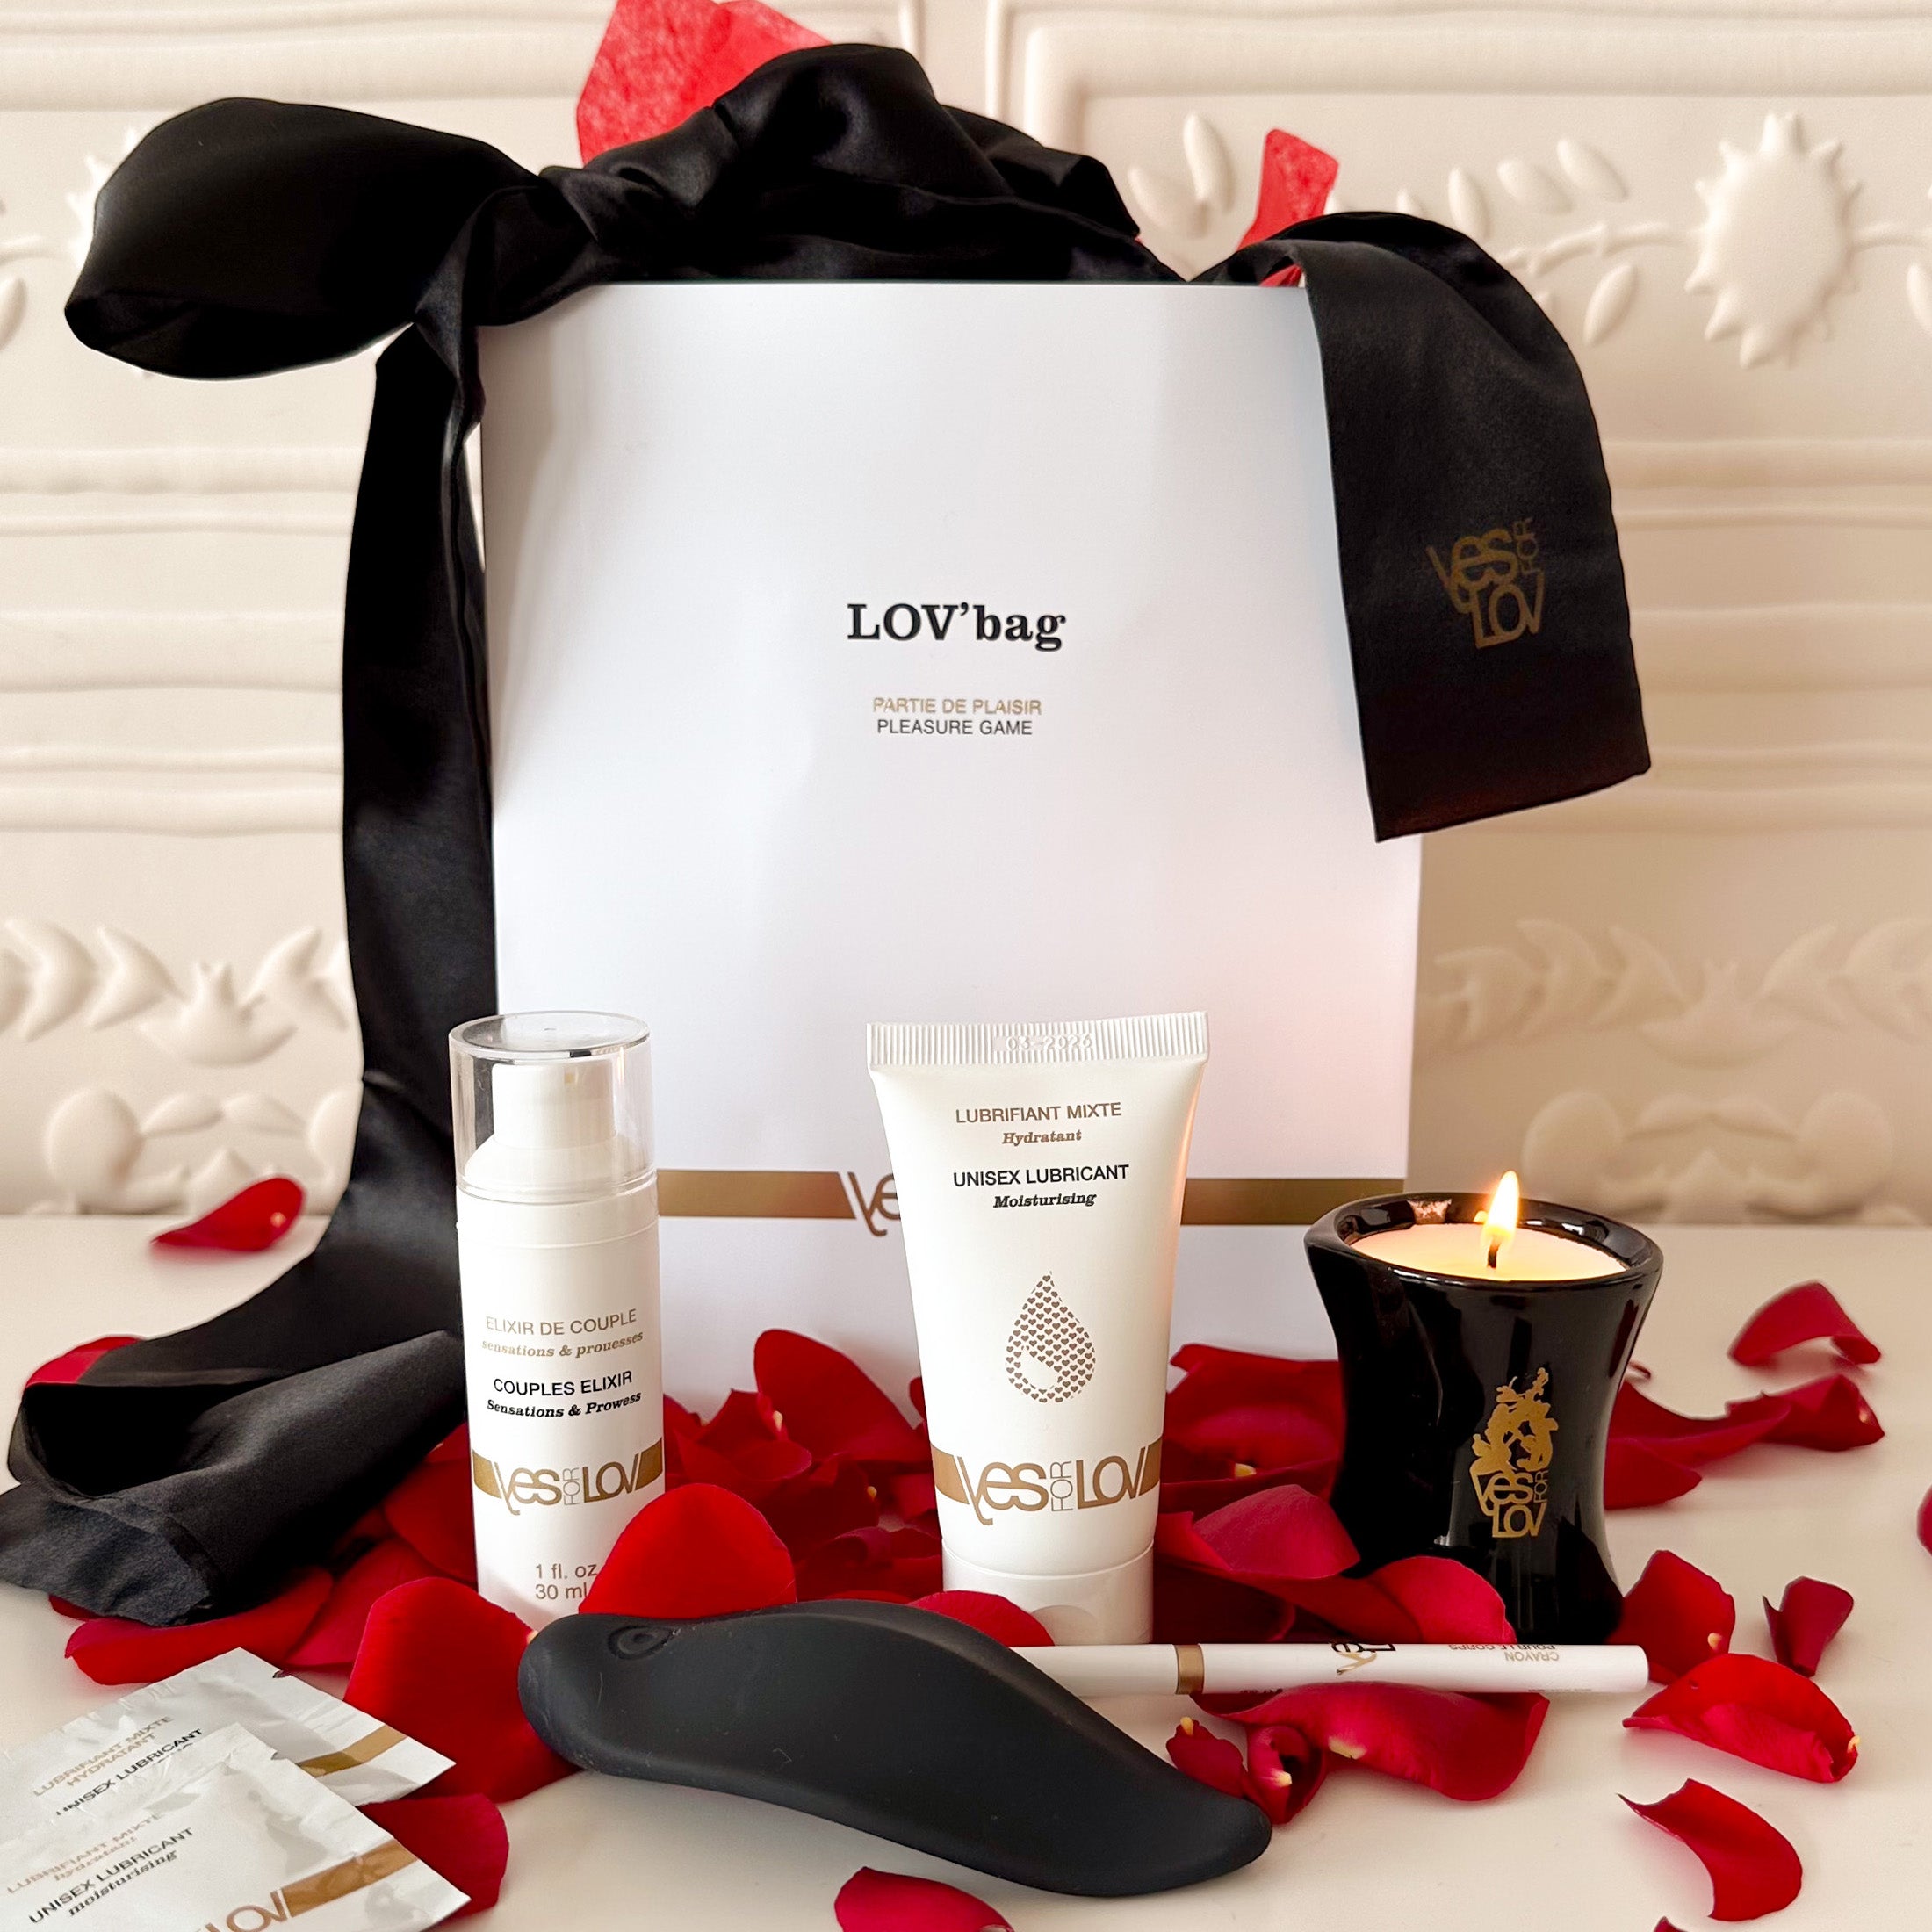 The YESforLOV Valentine's Day Gift Set, the perfect way to spice up this evening